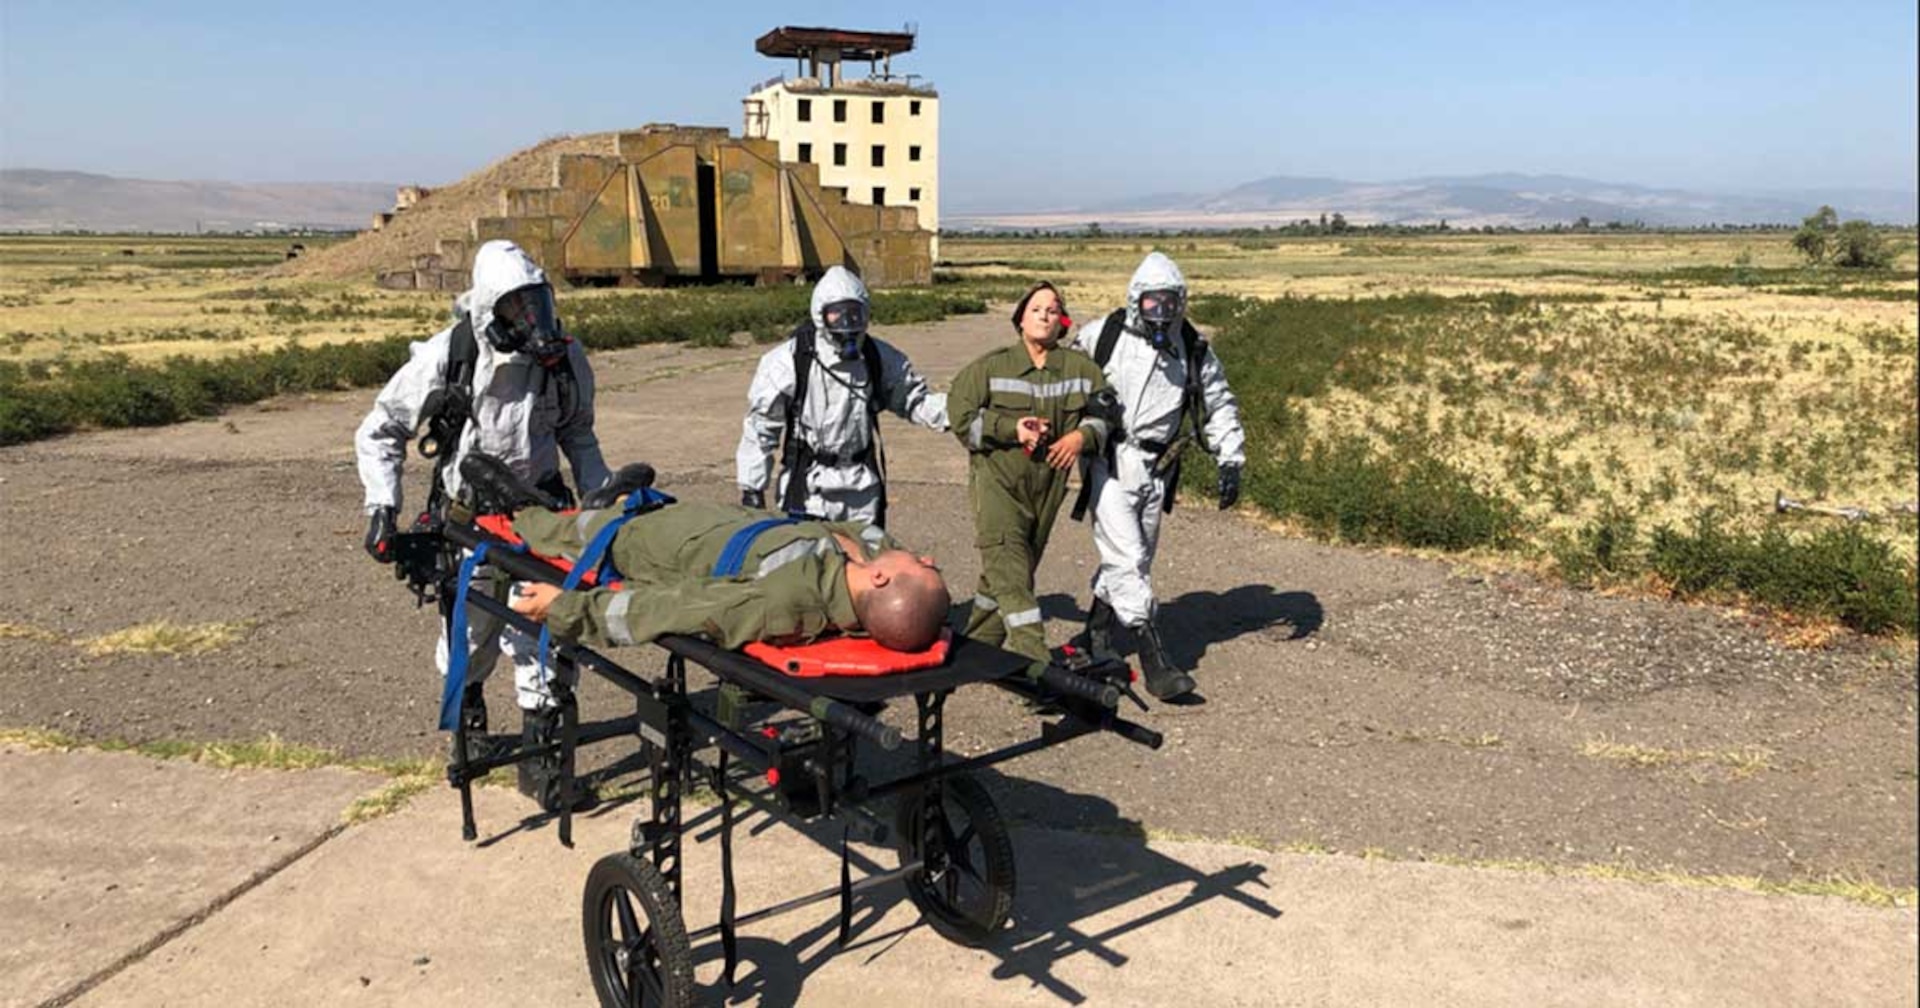 DTRA’s Building Partner Capacity Department hosted CBRN/CWMD Interagency Field Training Exercise (FTX) in Tbilisi, Georgia, 9-19 August 2022. The Interagency FTX focused on strategic, operational, and tactical CBRN and CWMD capabilities of Georgian’s response units.